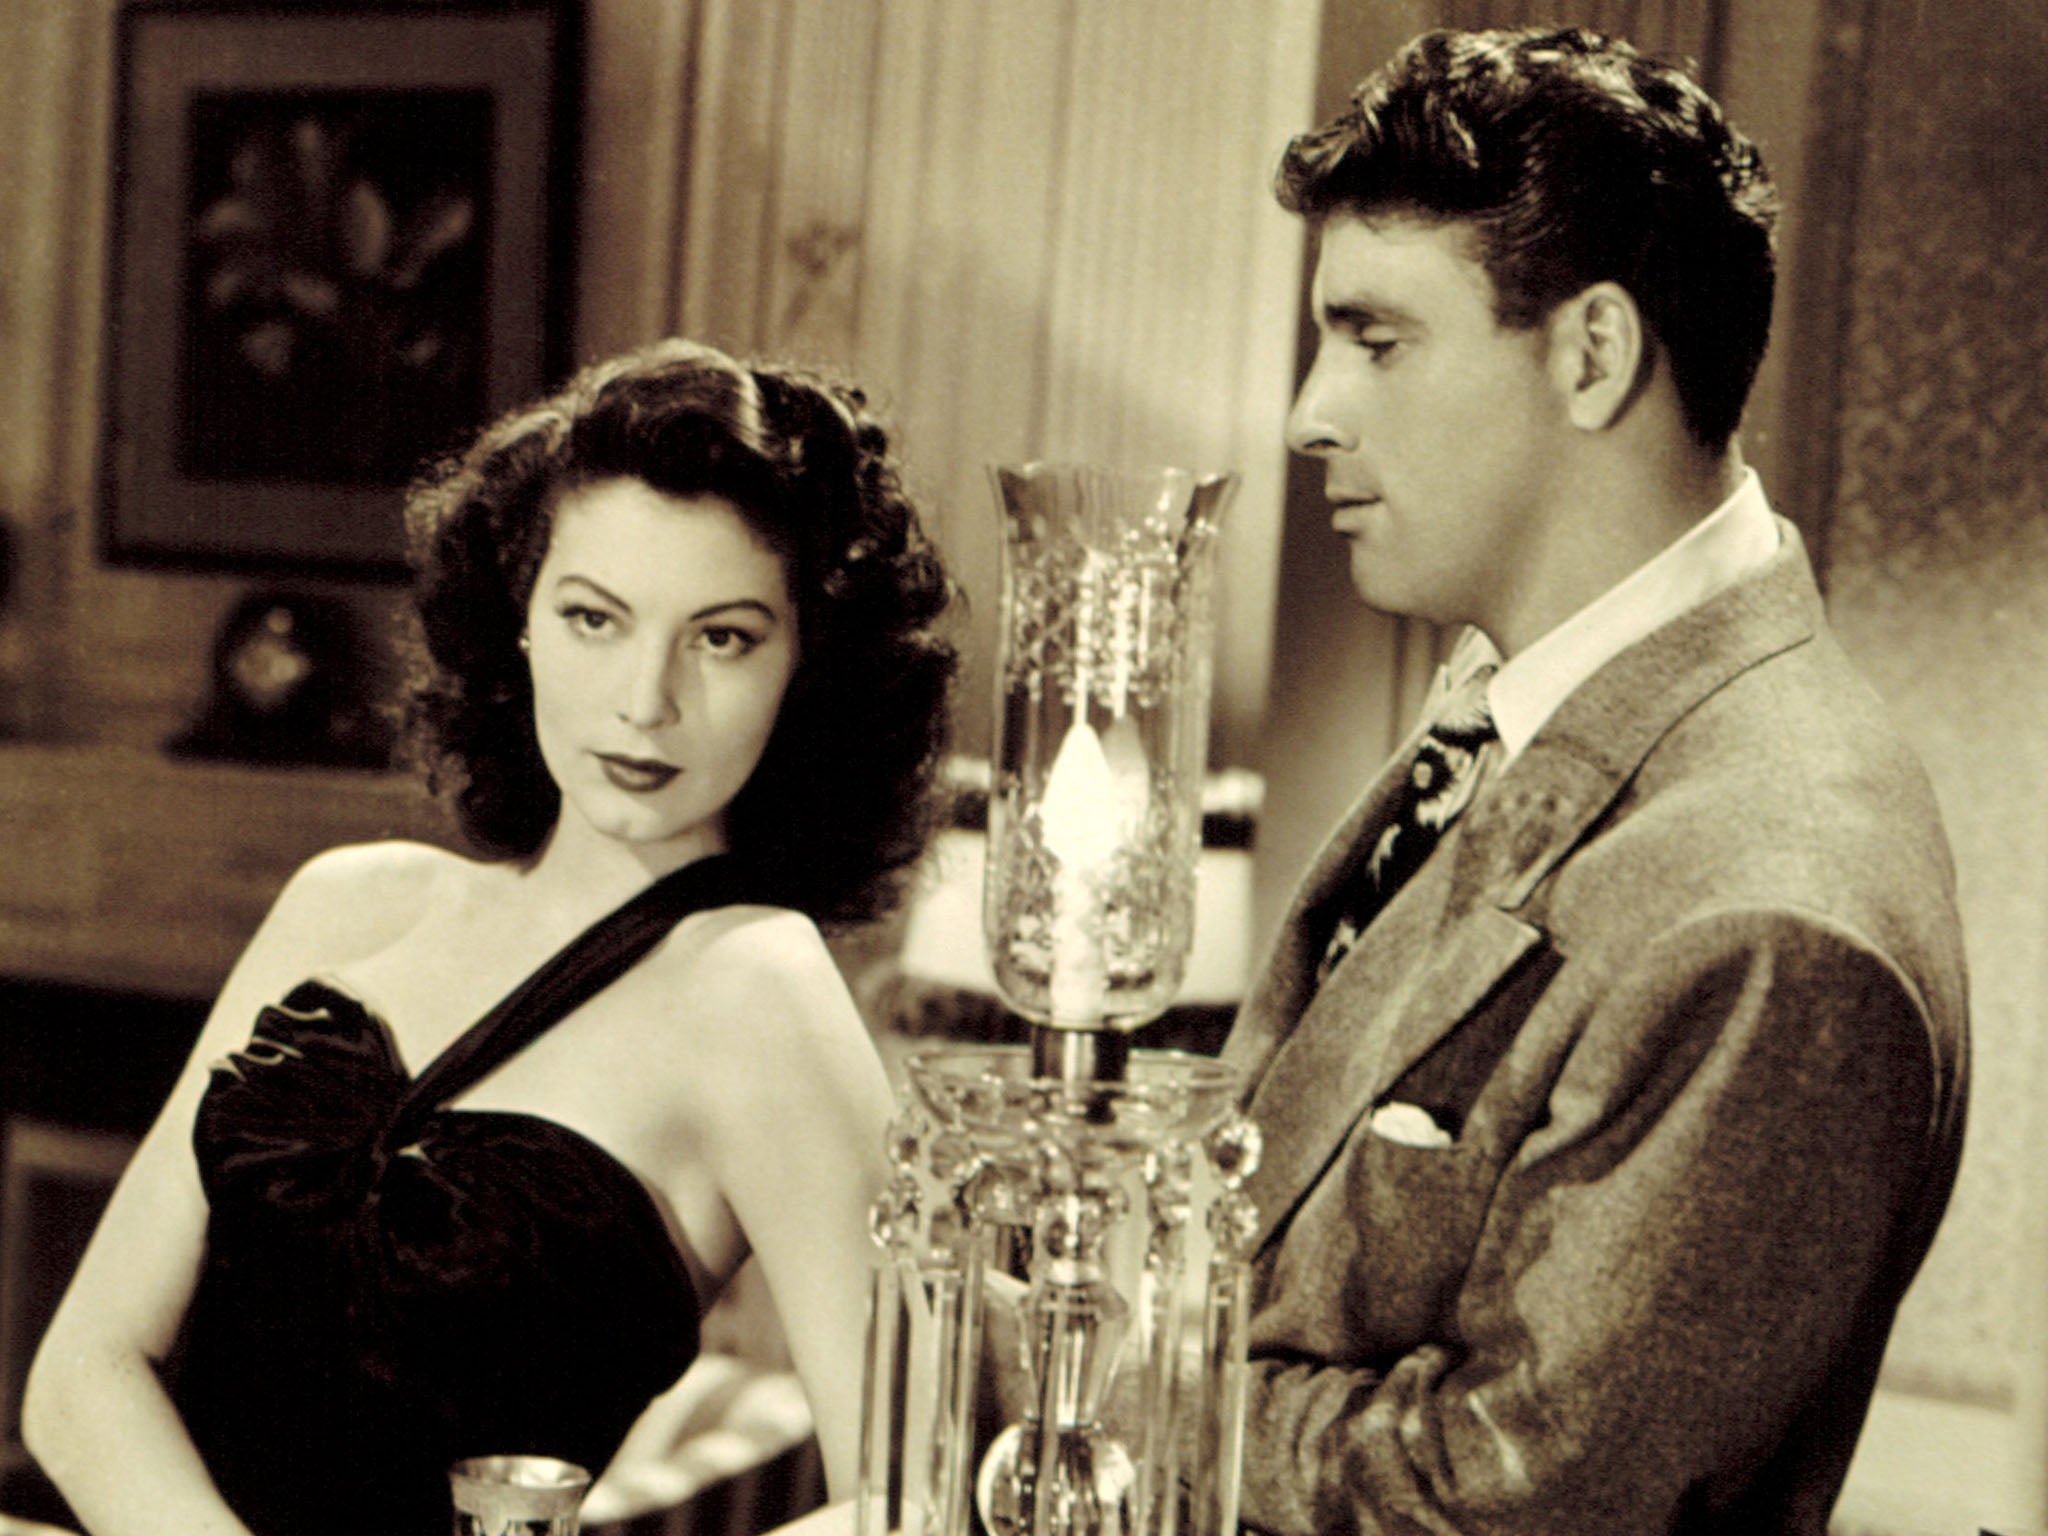 'The Killers', with Ava Gardner and Burt Lancaster